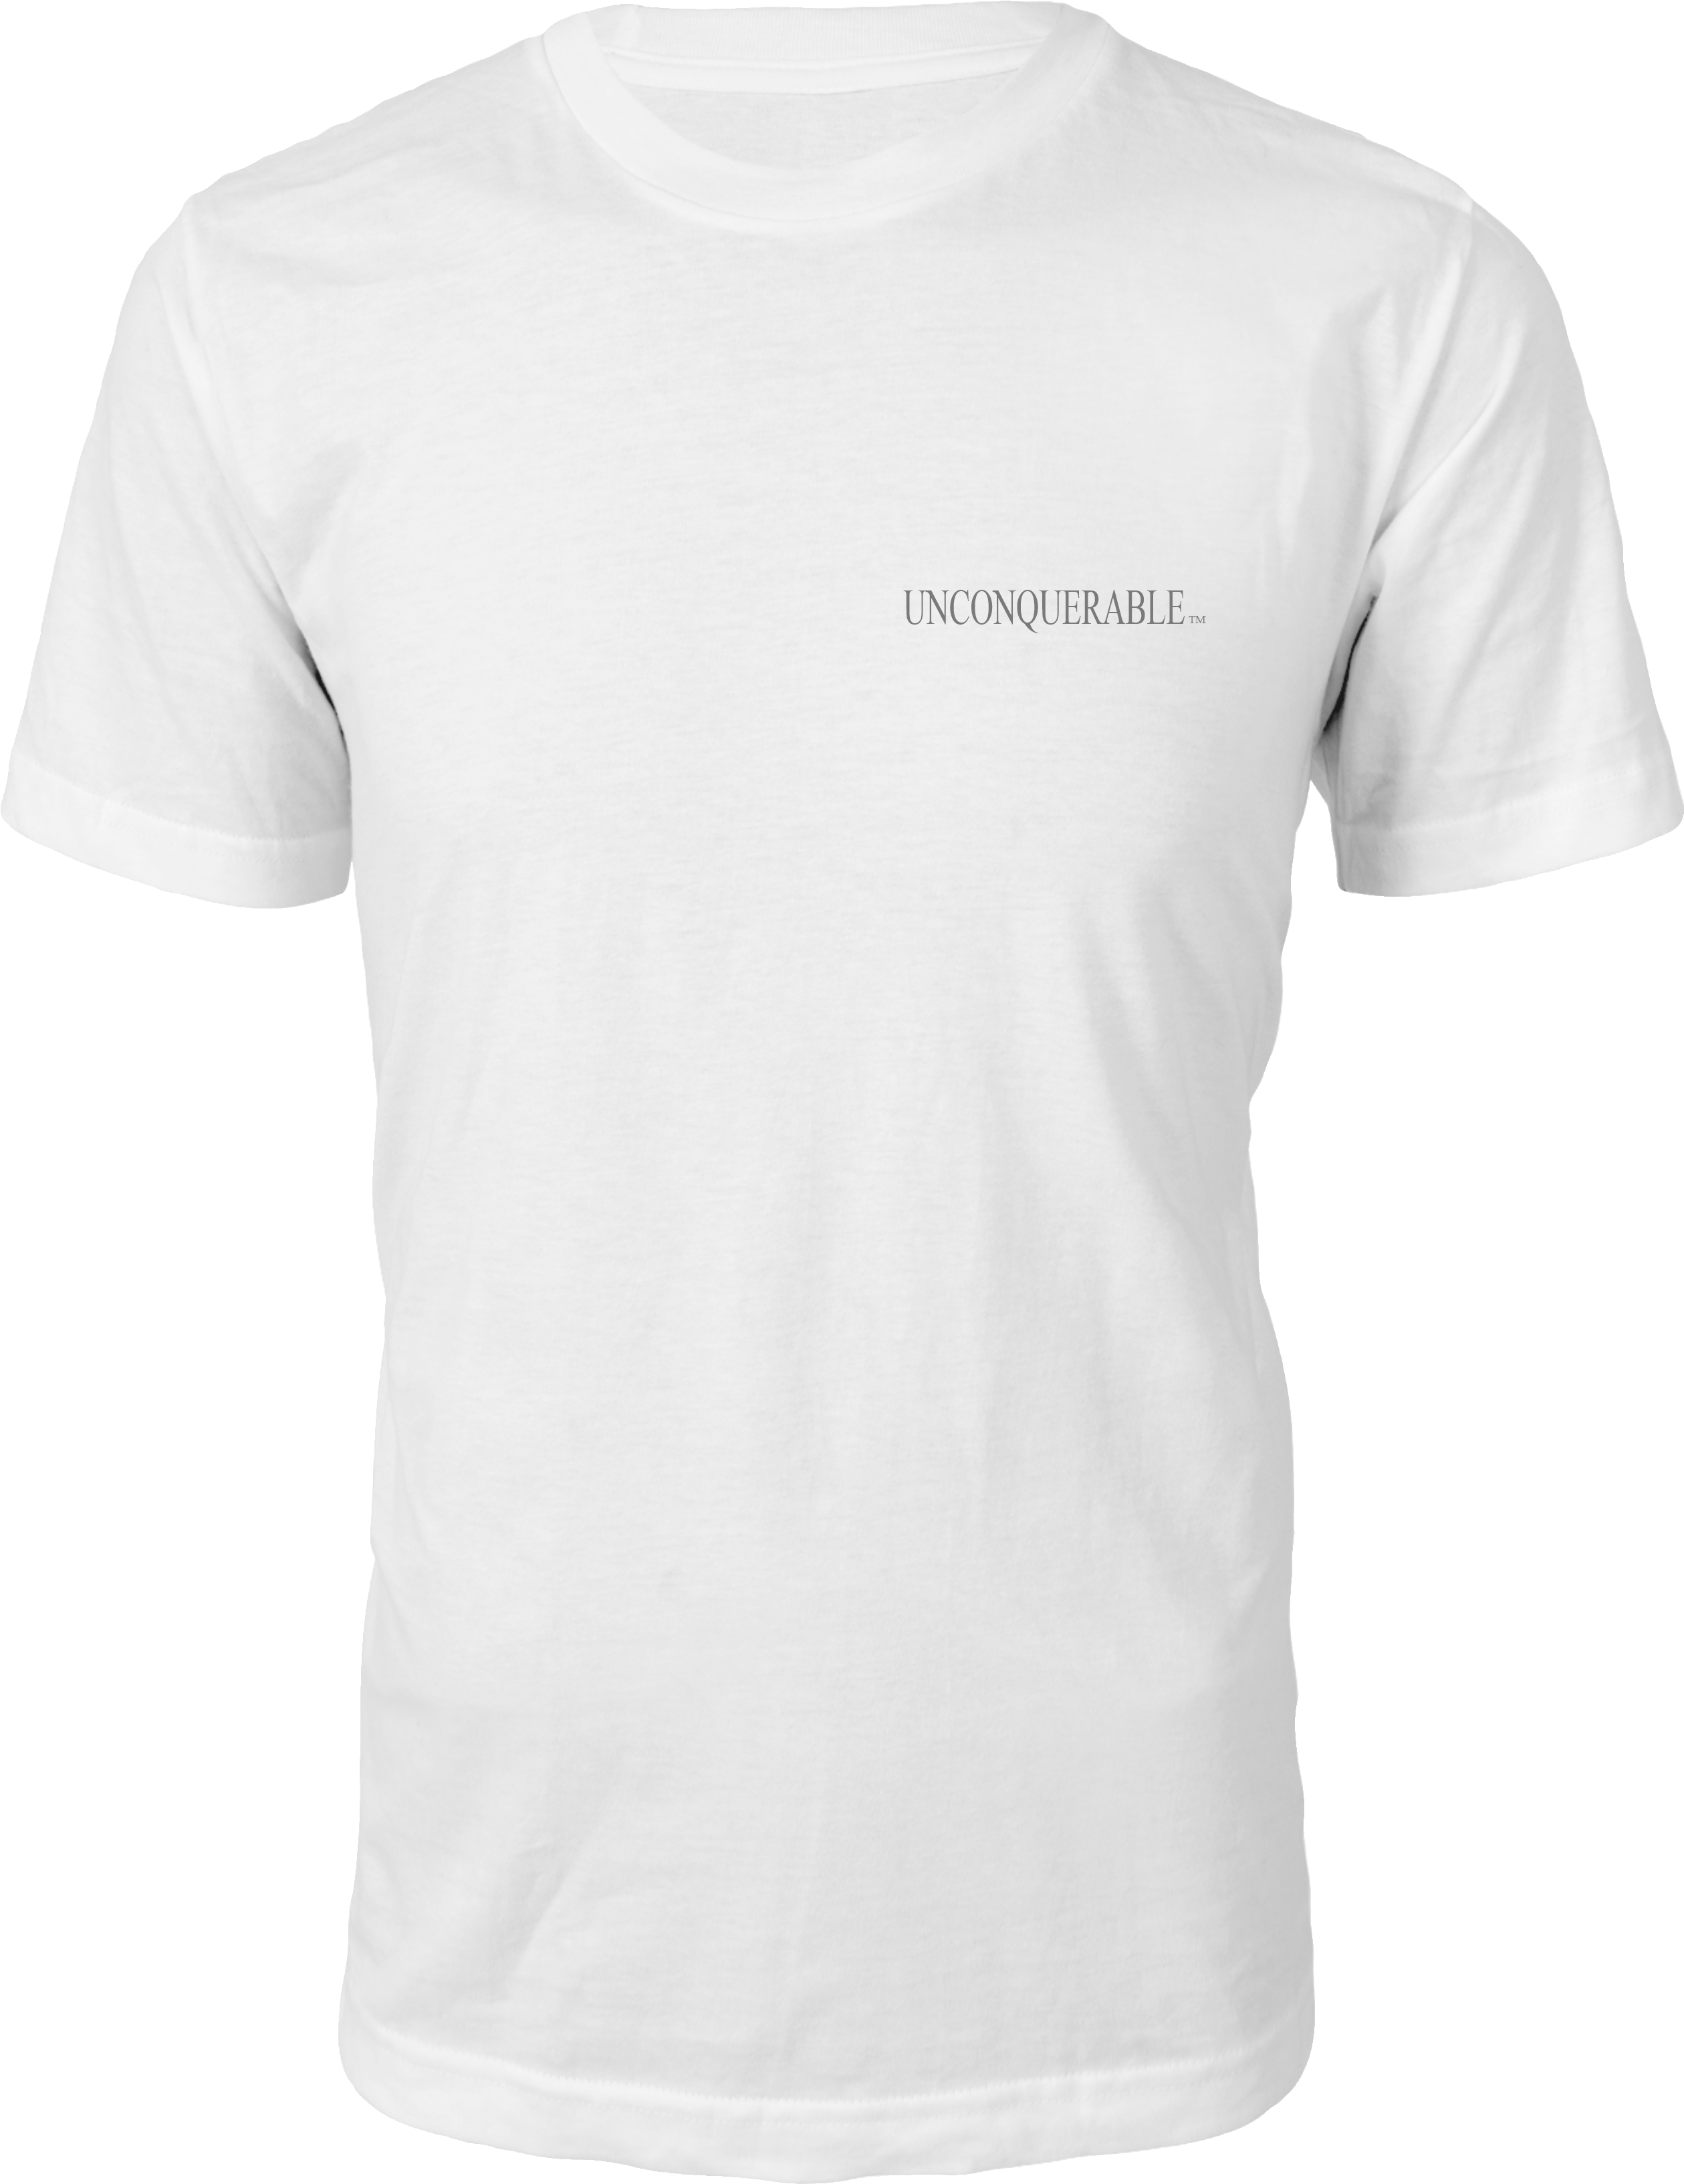 Free White T Shirt Png Download Free White T Shirt Png Png Images Free Cliparts On Clipart Library